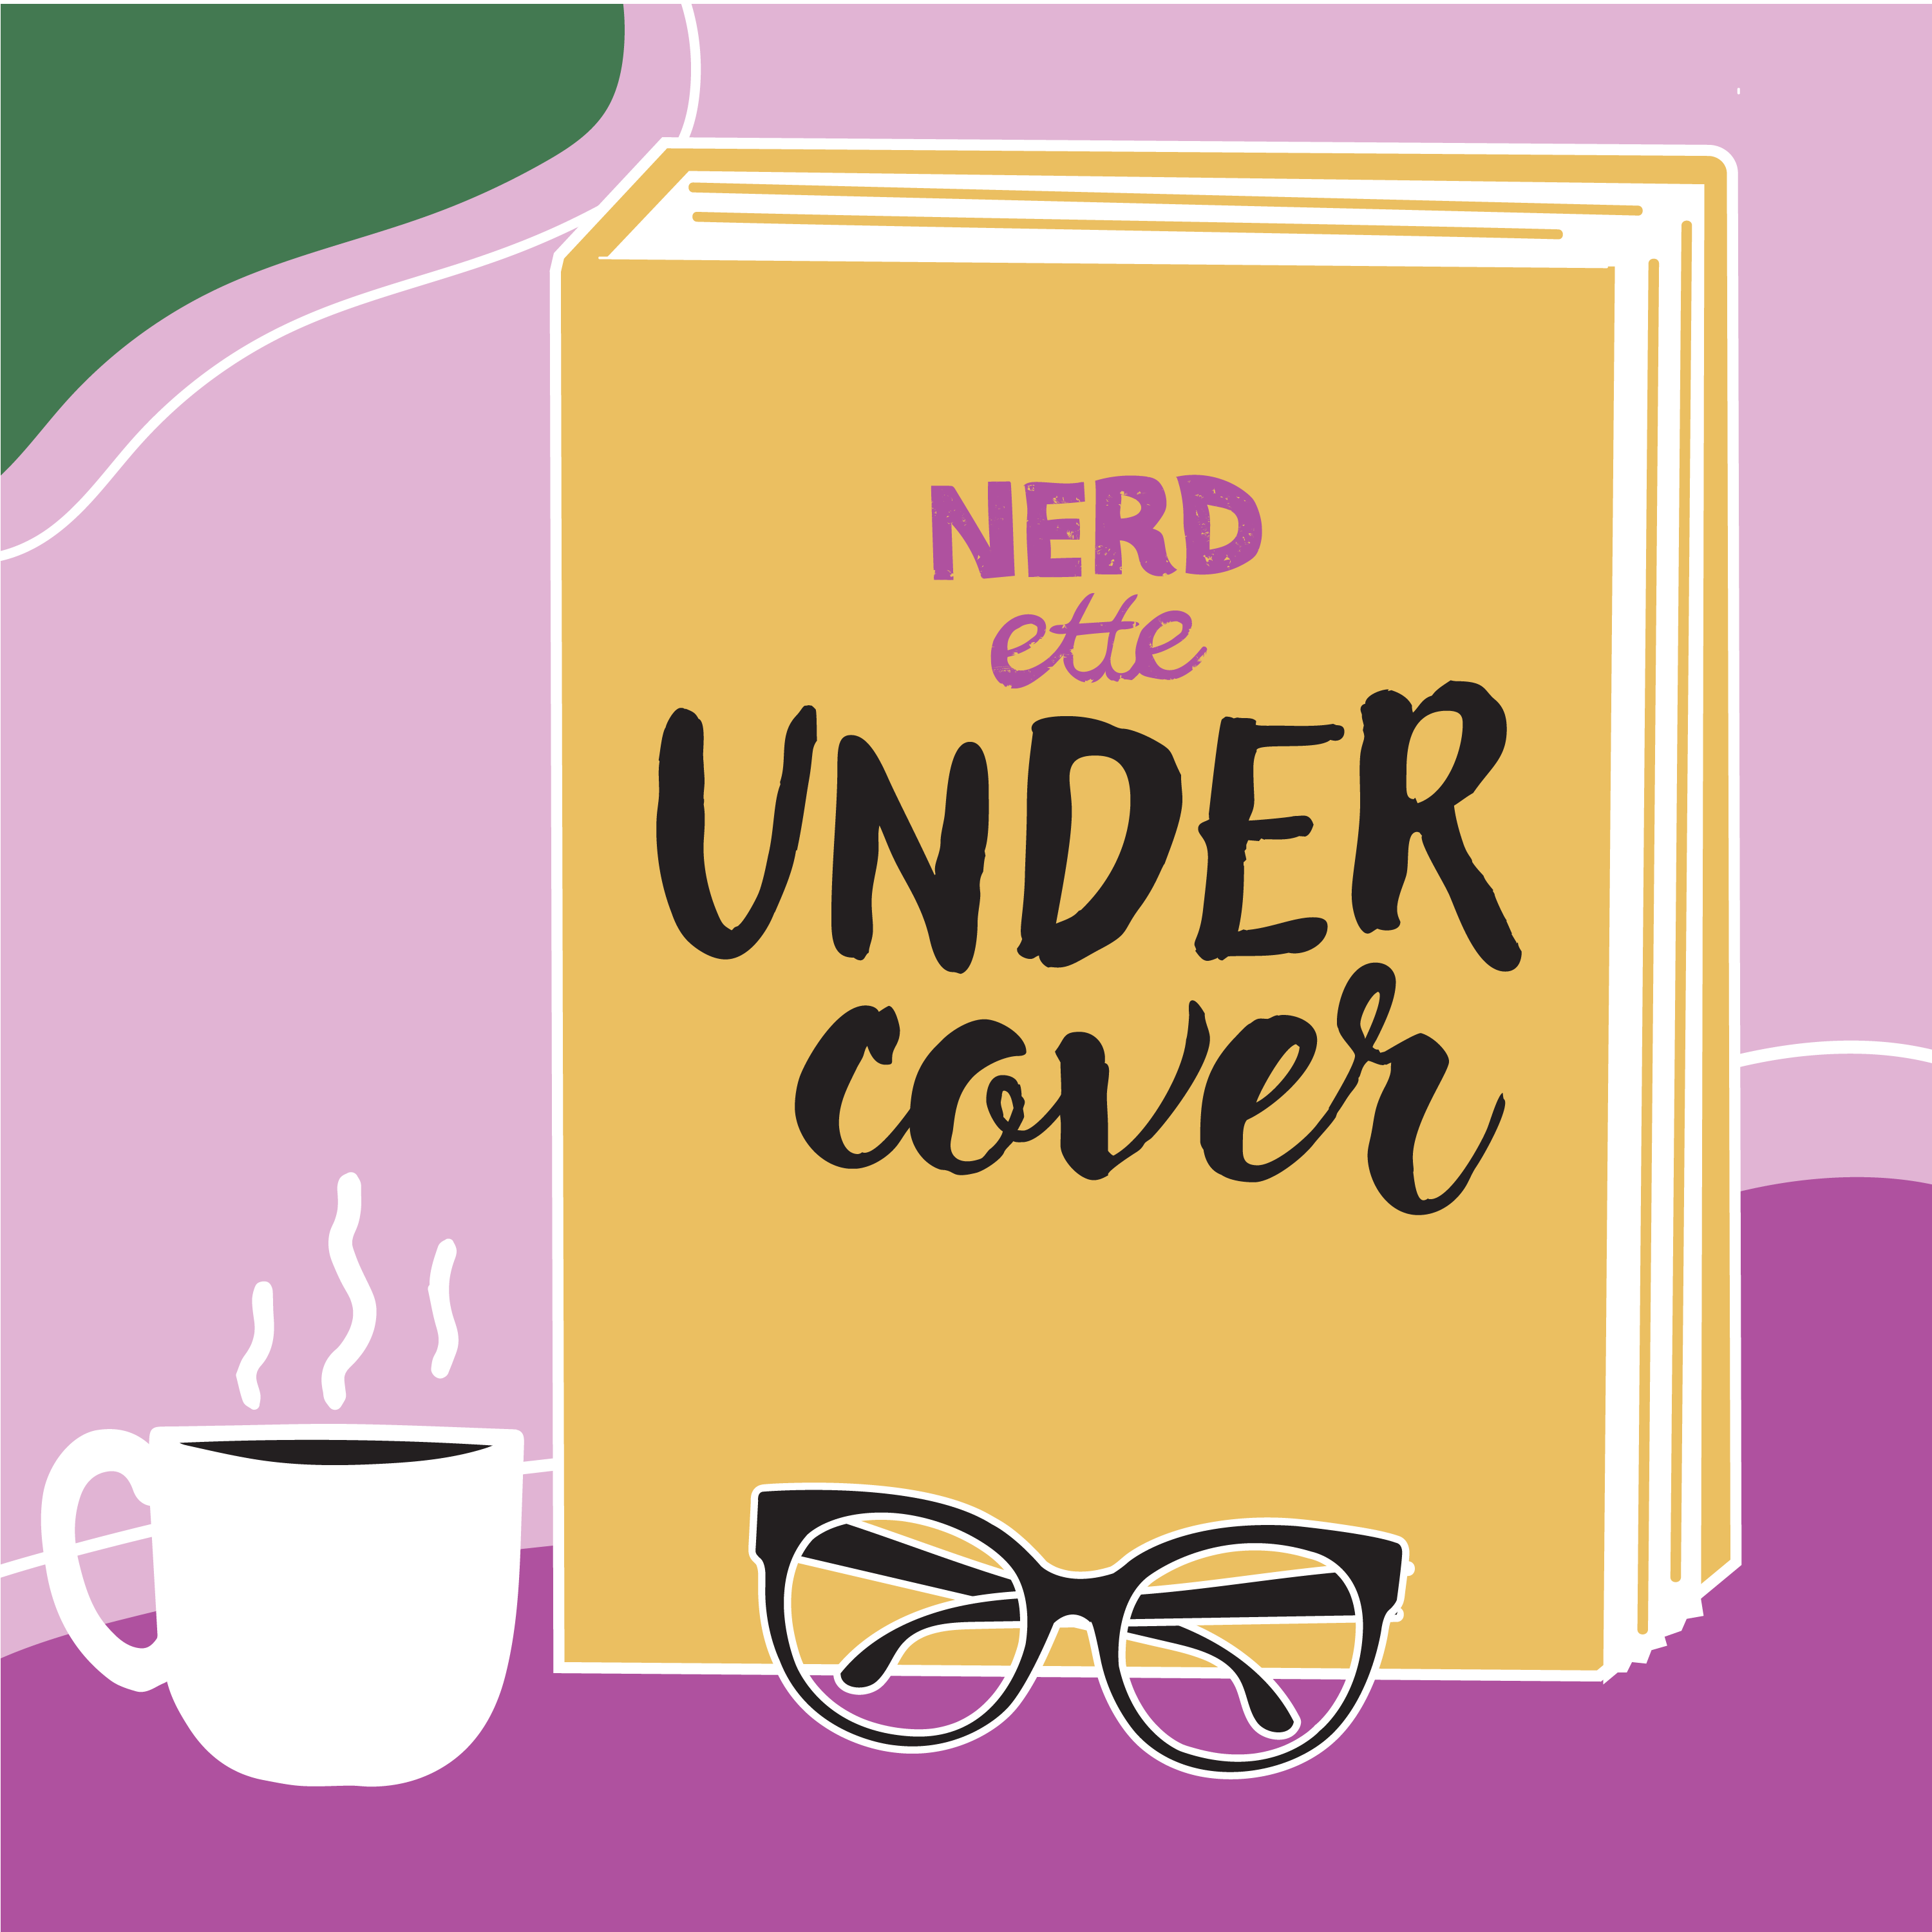 Undercover: The thorny business of book blurbs